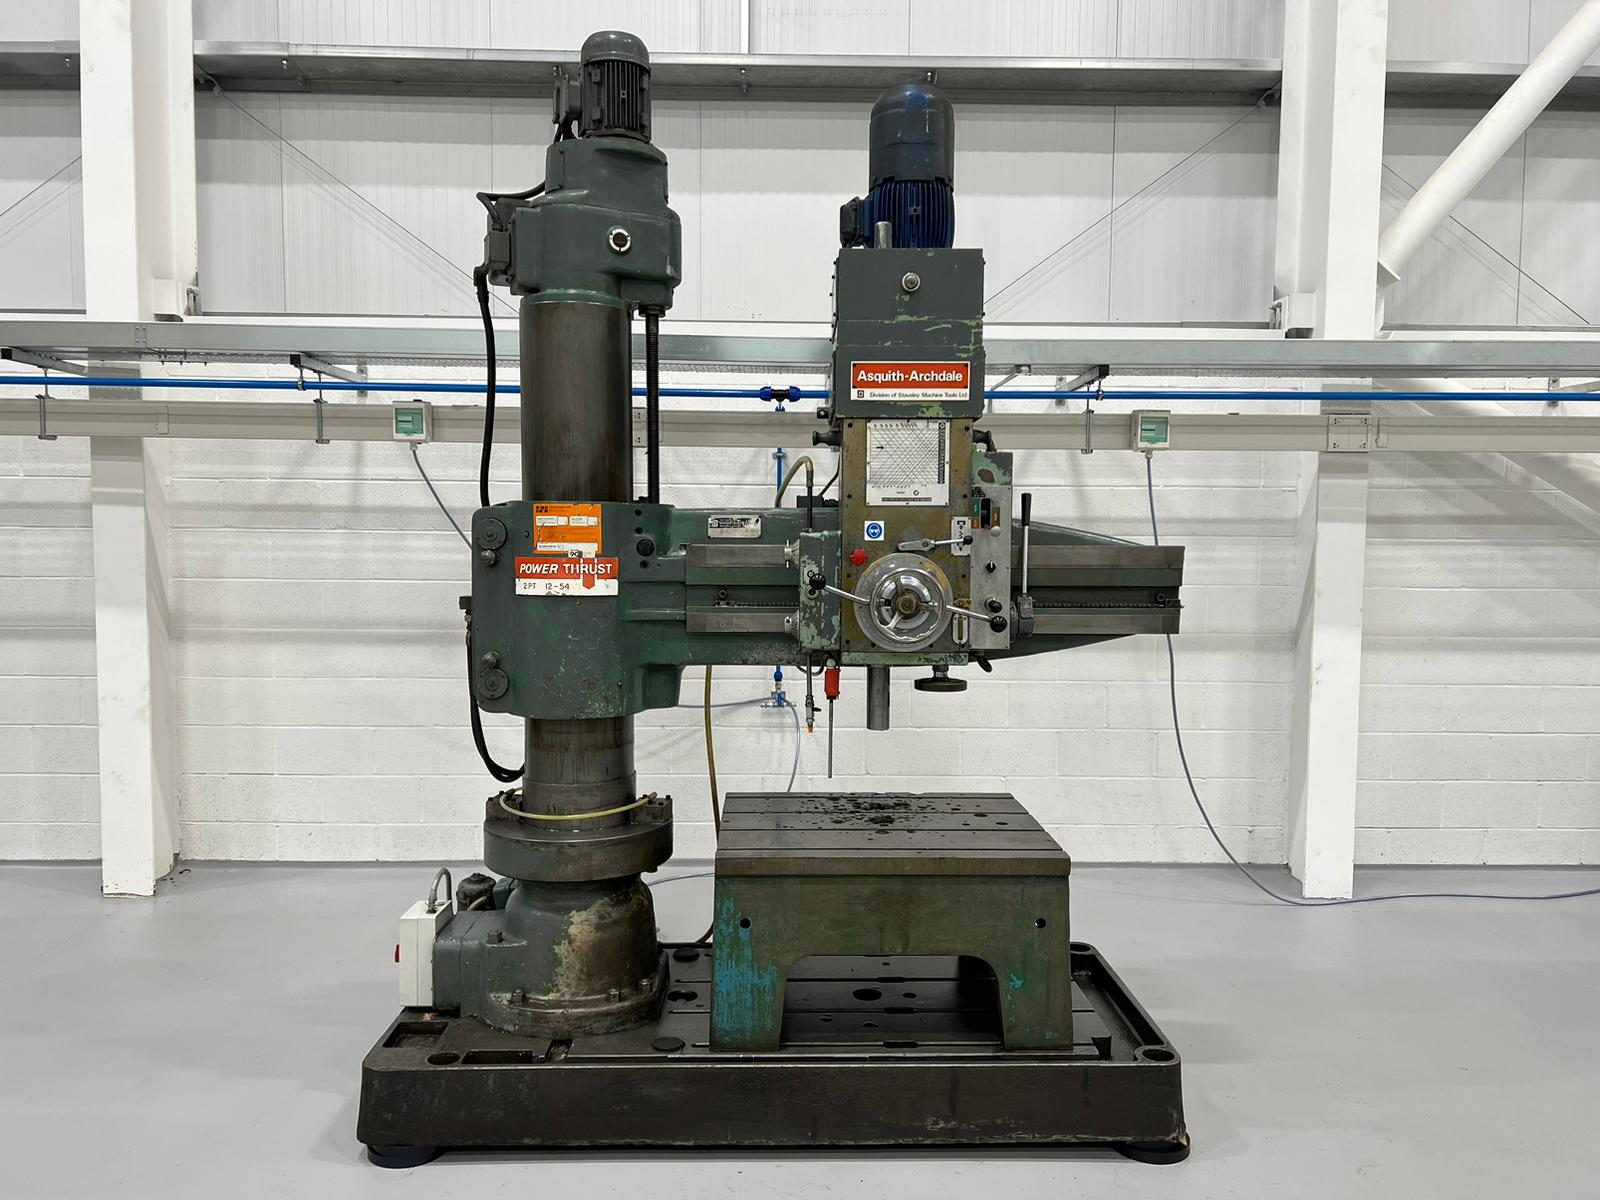 Drilling/ASQUITH-ARCHDALE Model 2PT 12-54 4’6”